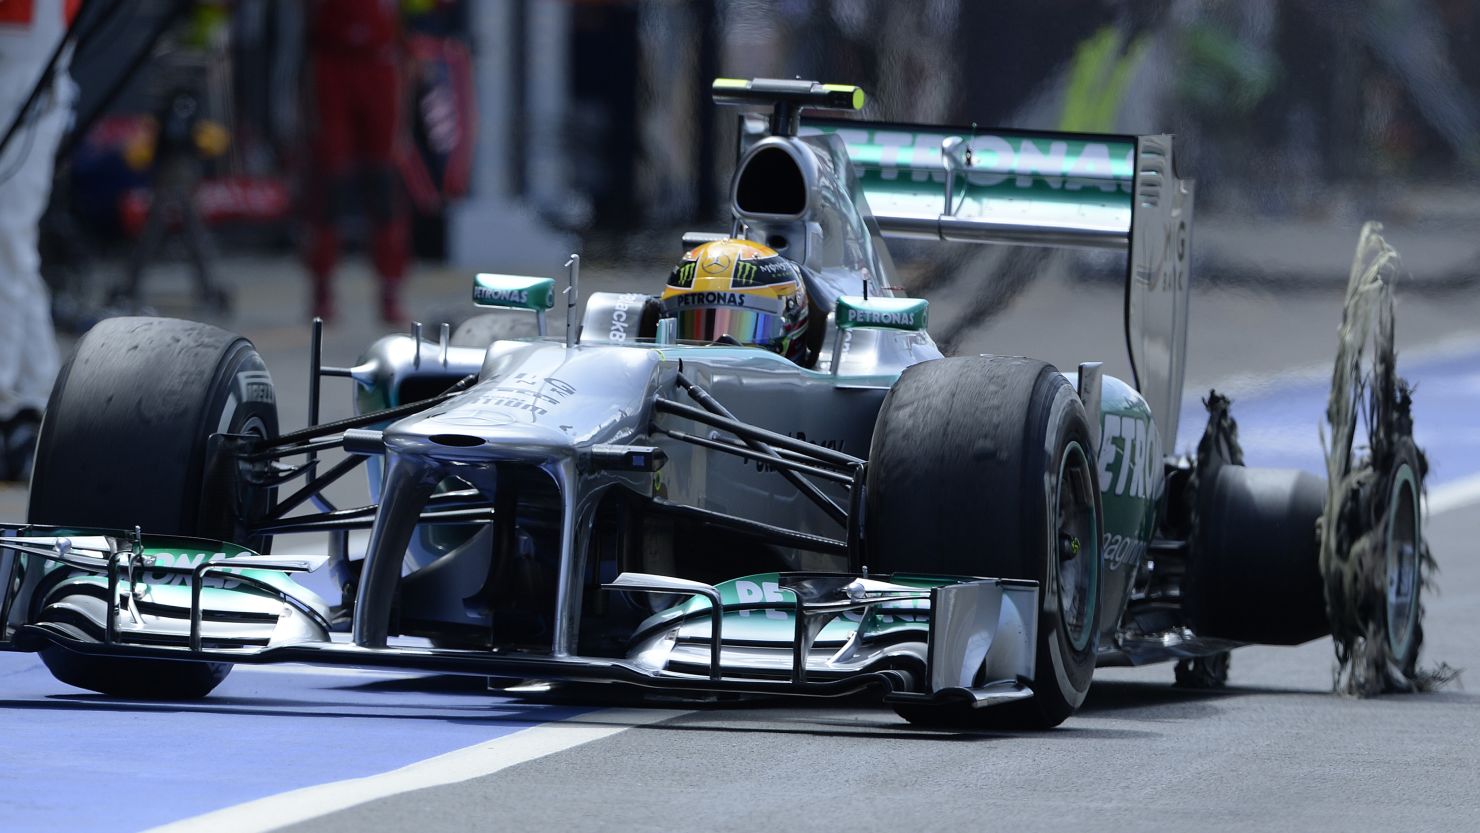 Lewis Hamilton pits with a shredded left rear tire after his high speed blow out at Silverstone in the British GP.